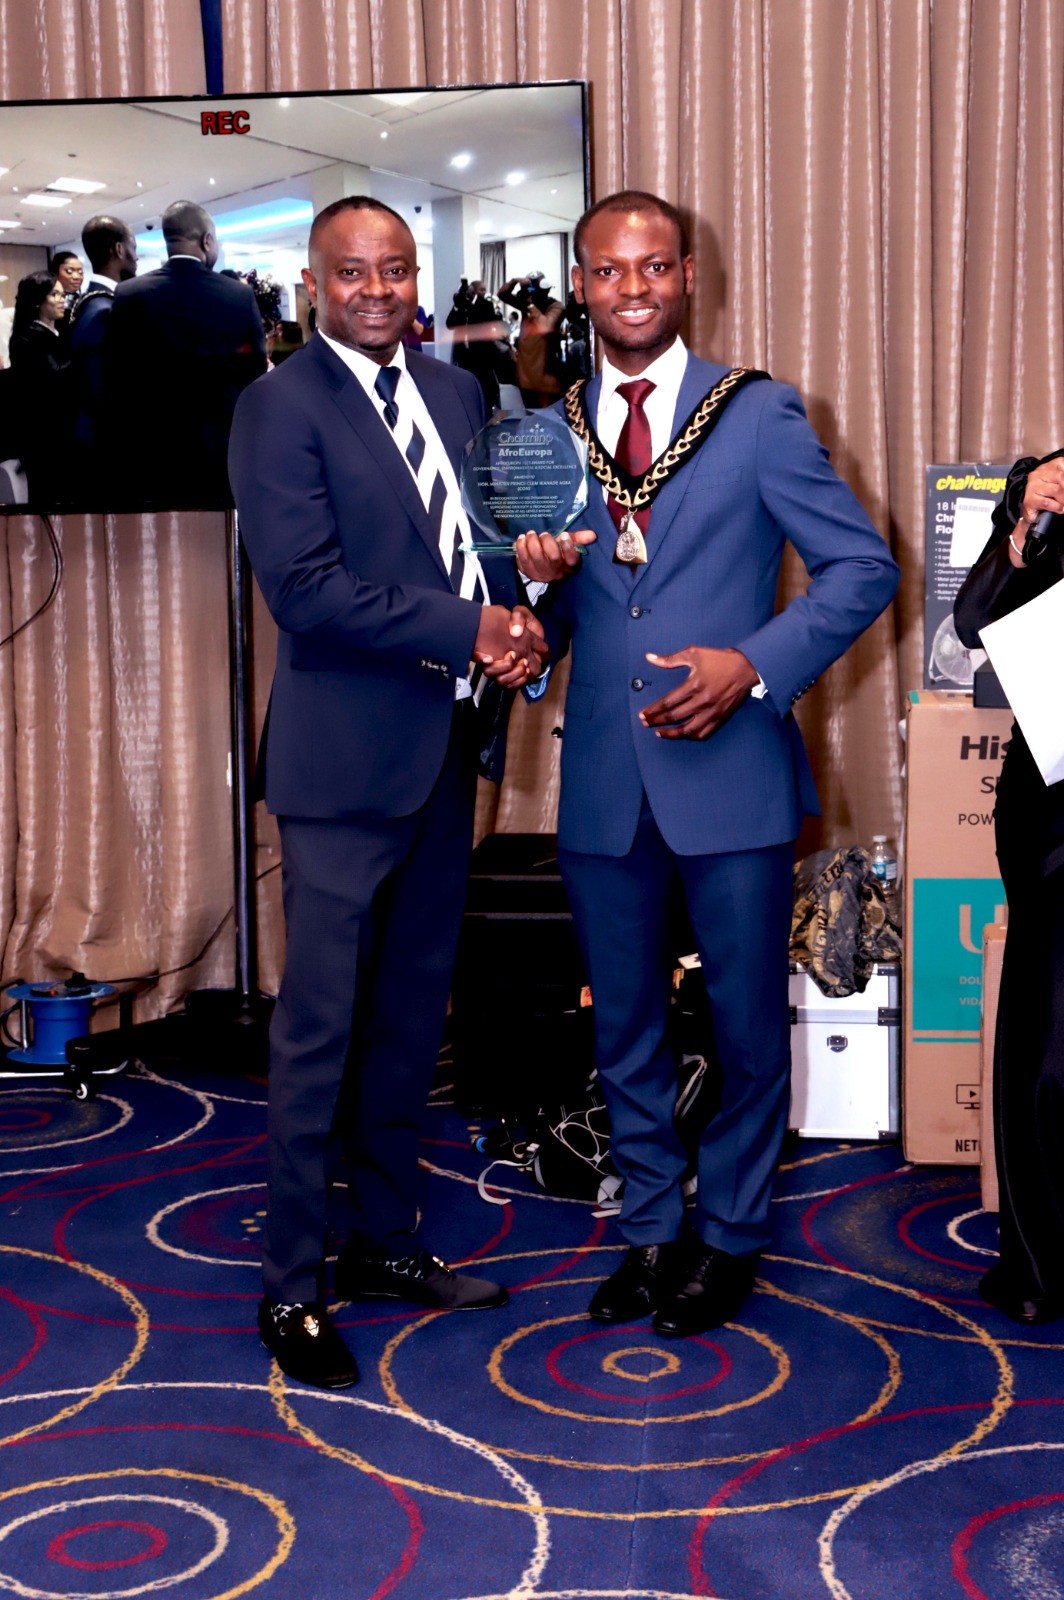 Presented by The Mayor of Southwark, Cllr Michael Sittu, Martins Sadoh receives the AFROEUROPA 2023 Award for Governance, Environmental & Social Excellence on behalf of Hon. Minister Prince Clem Agba (CON)